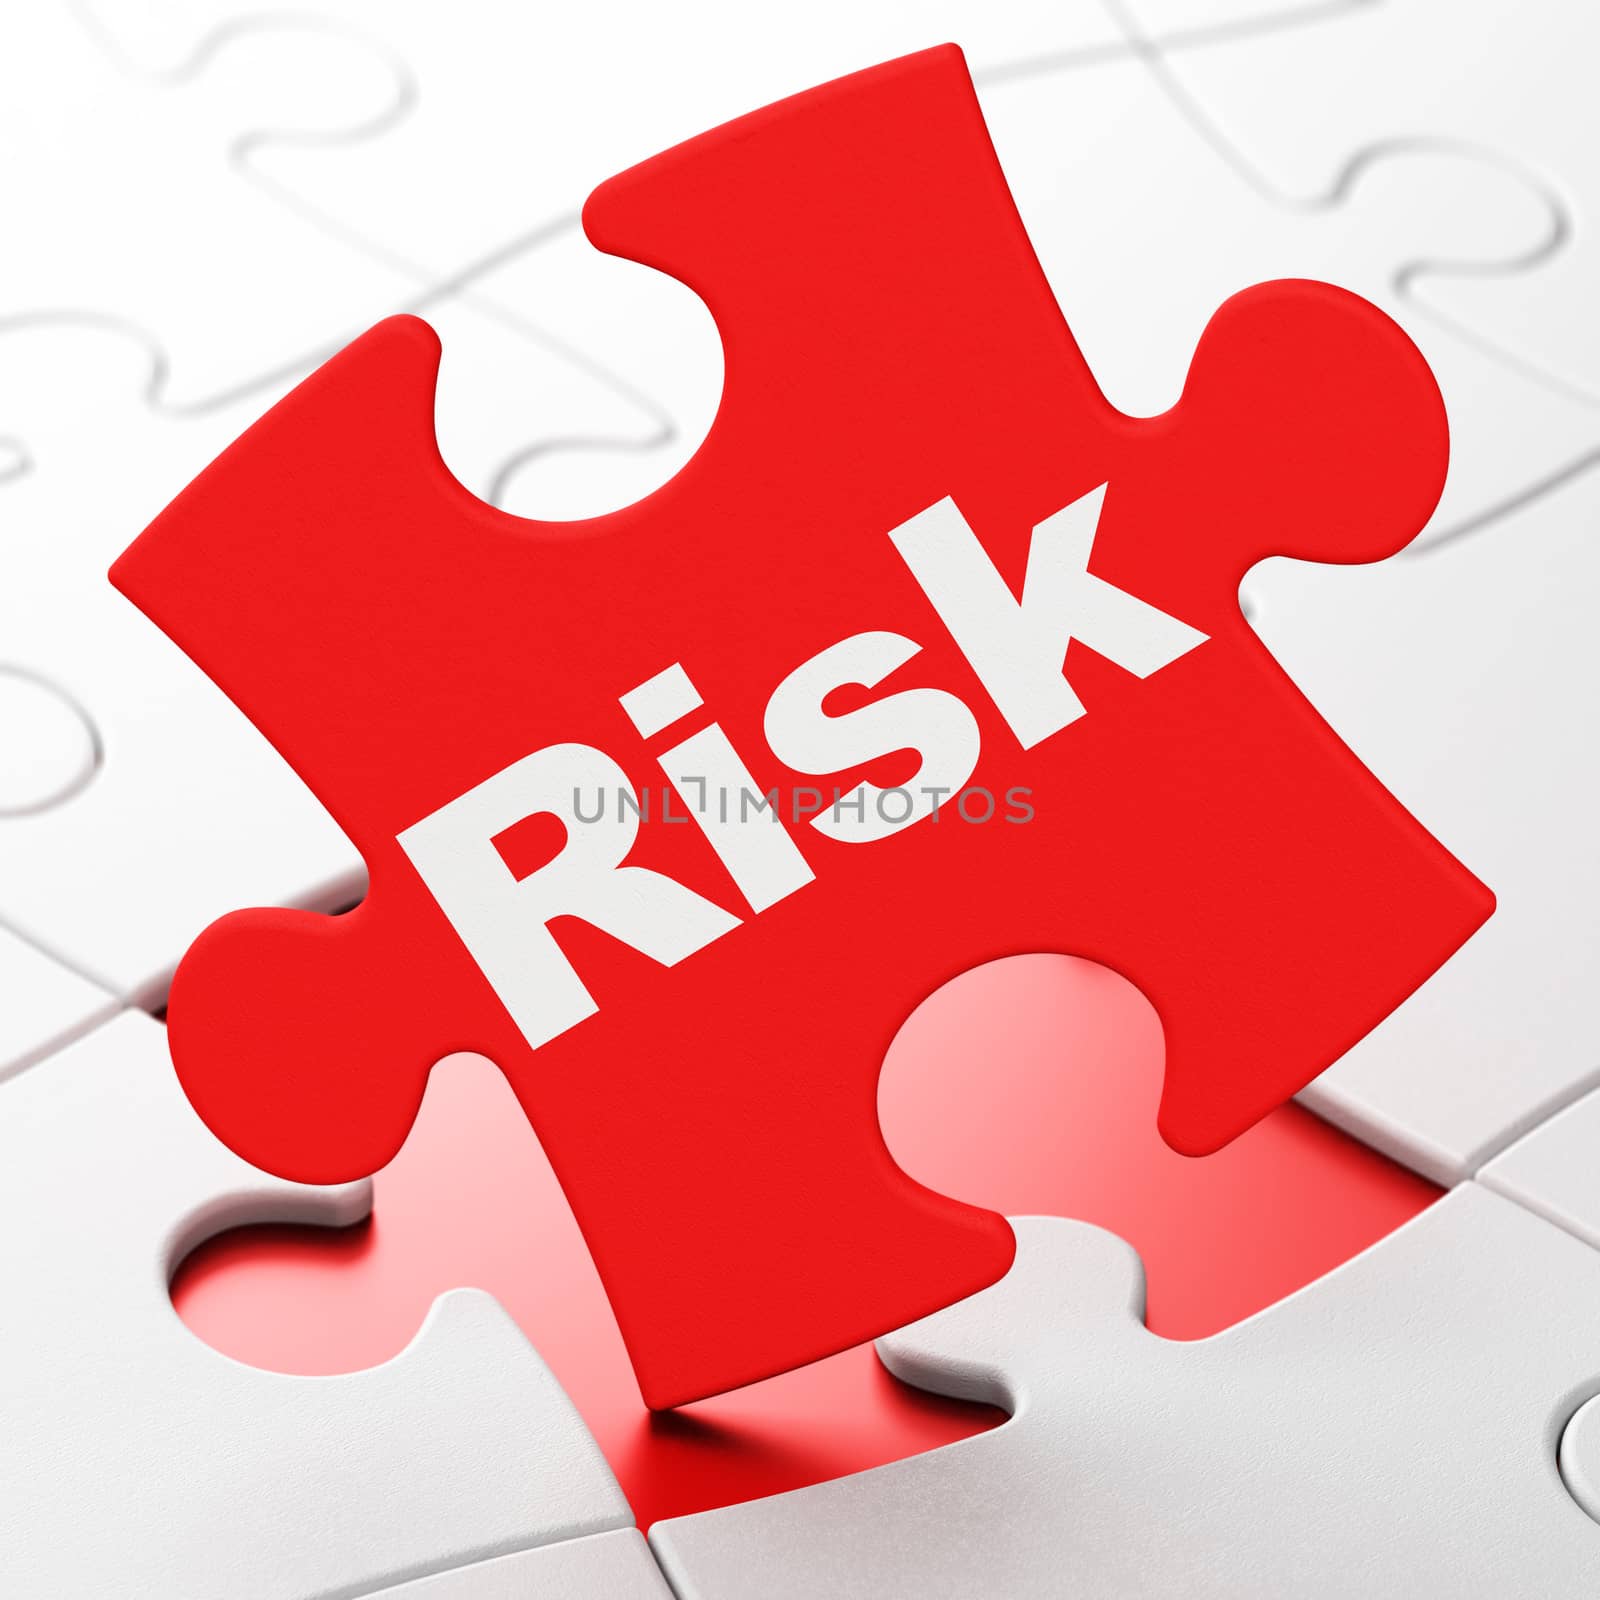 Business concept: Risk on puzzle background by maxkabakov